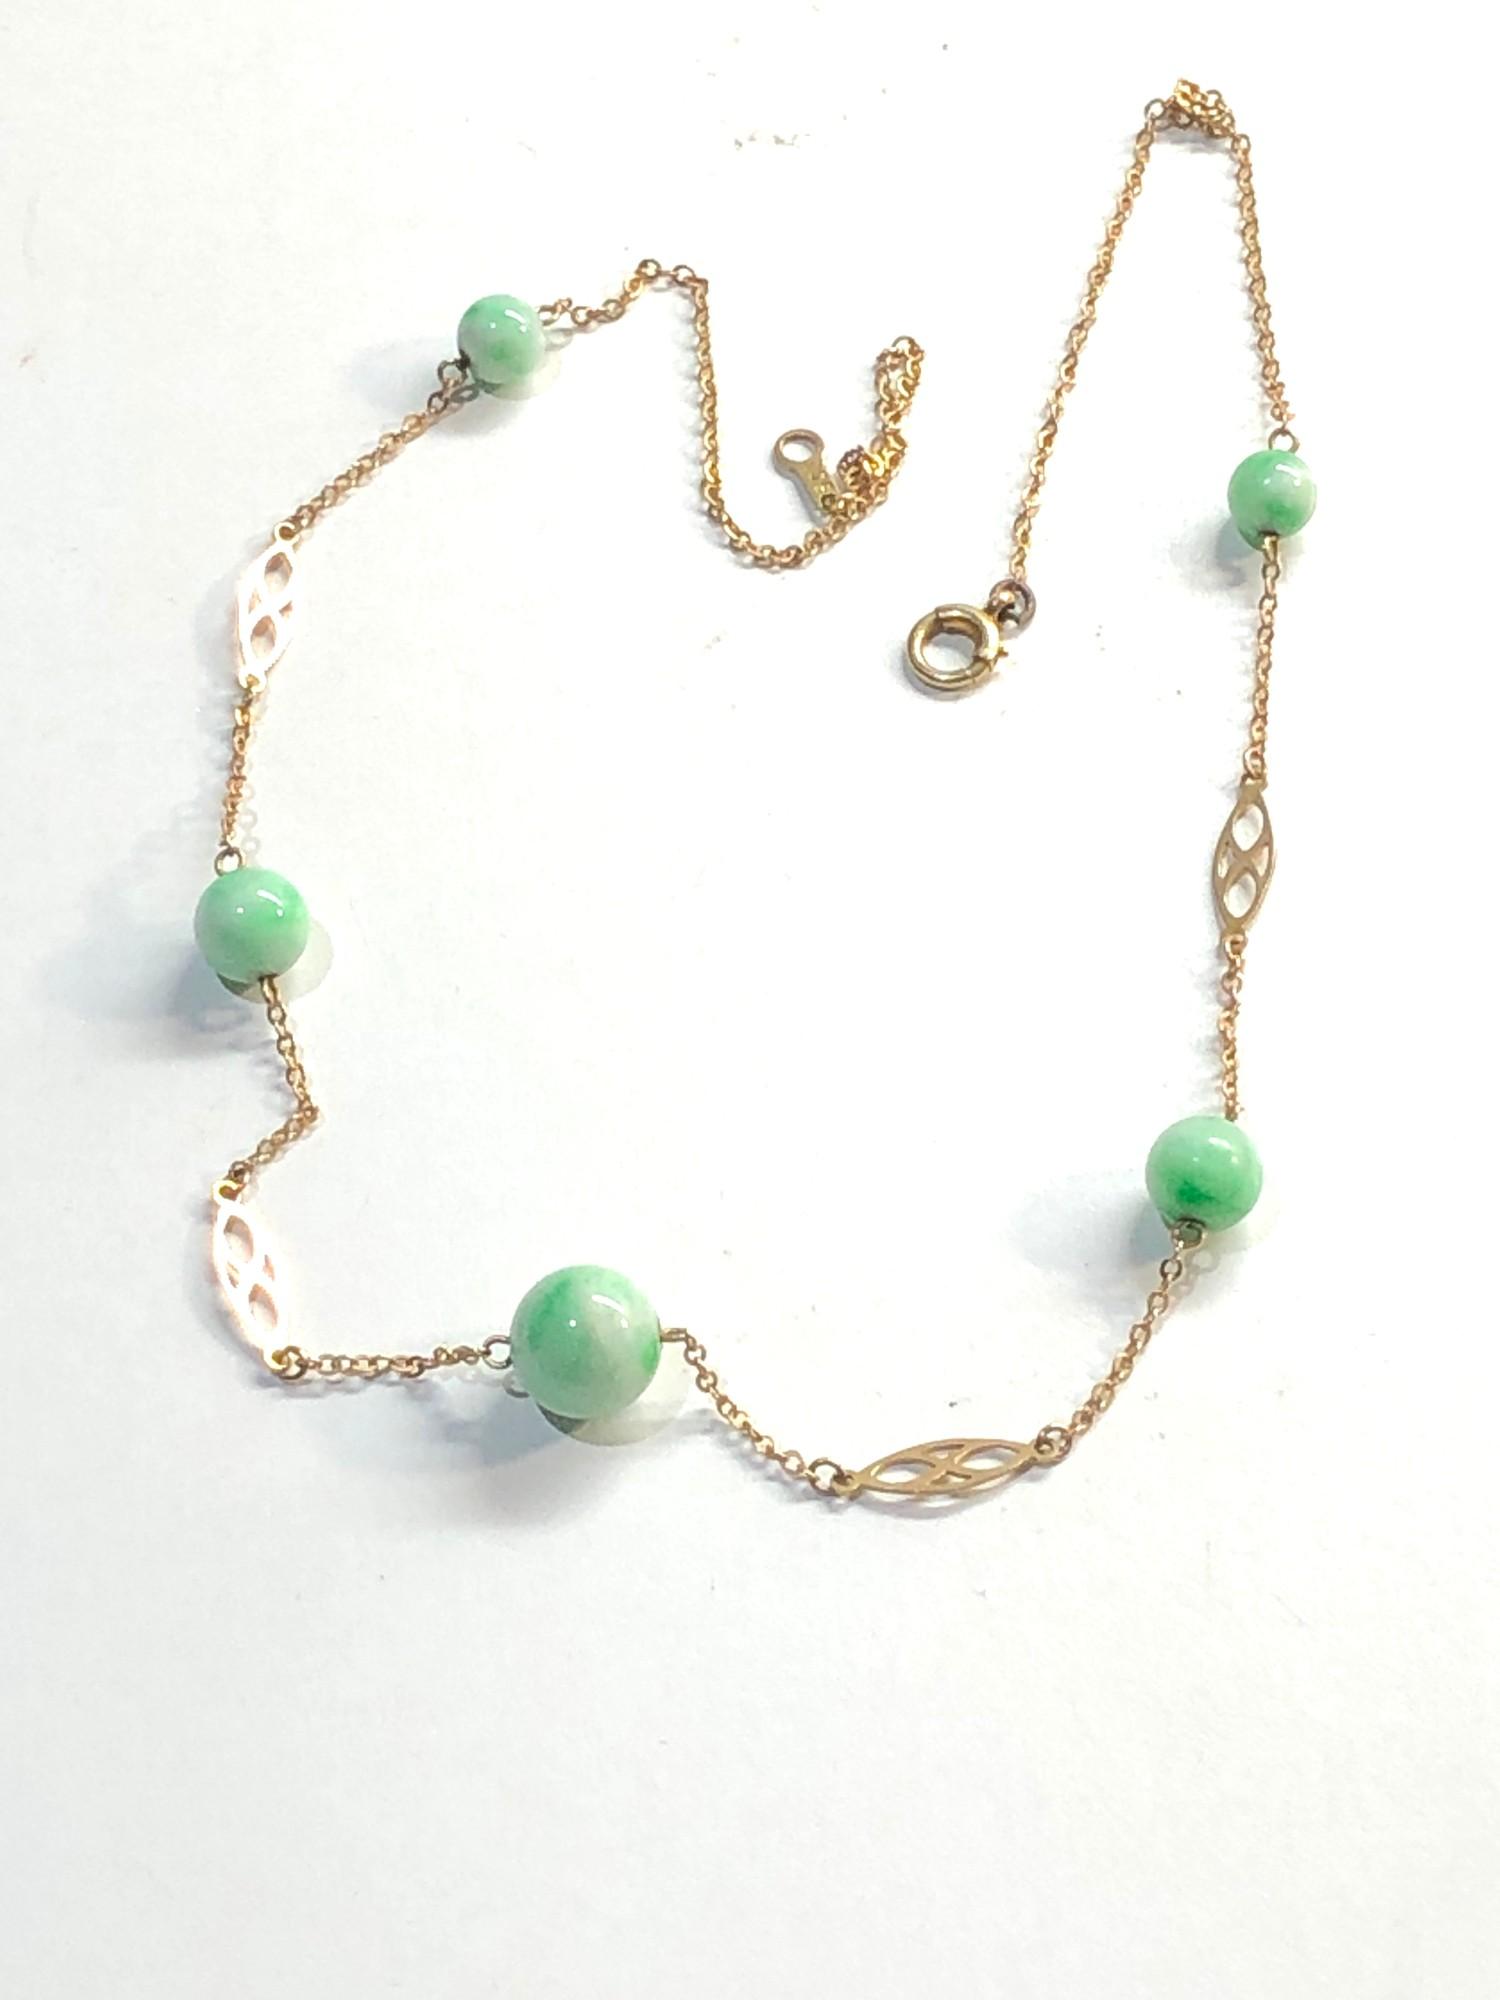 9ct gold jade necklace, overall good condition, largest jade bead measures approximately 9mm - Image 2 of 3